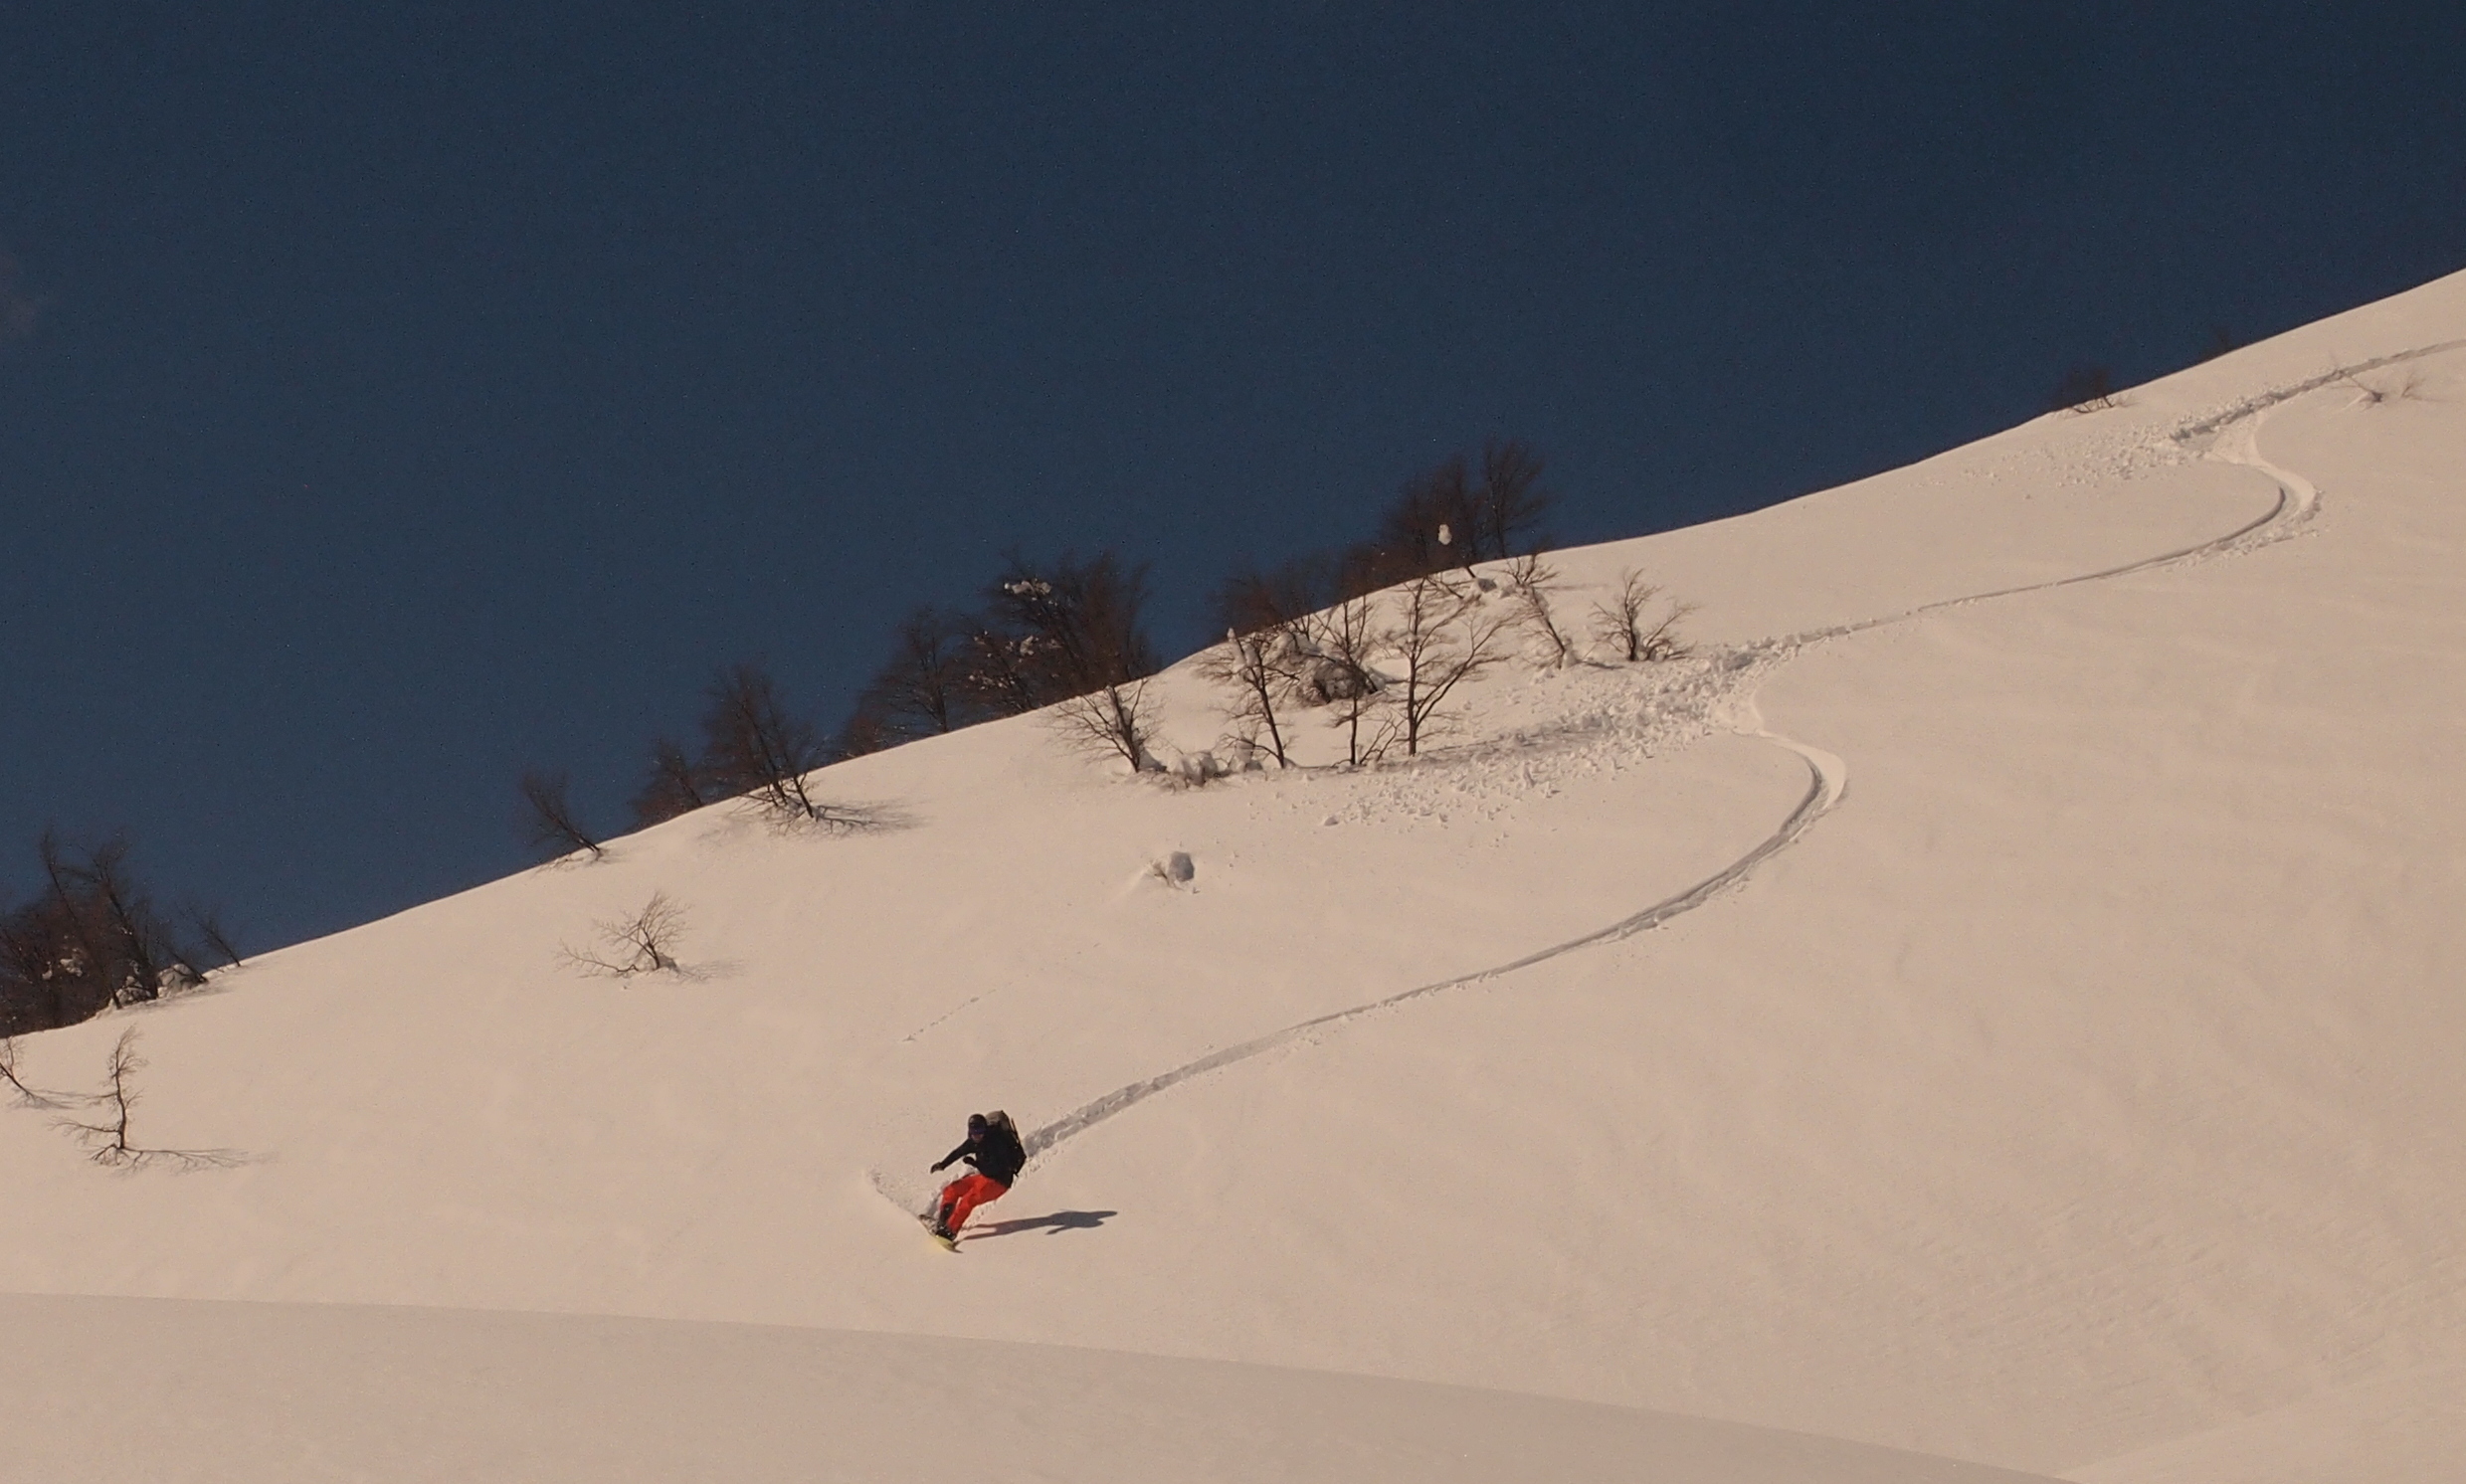 Sep gets some turns nearing the tree line: